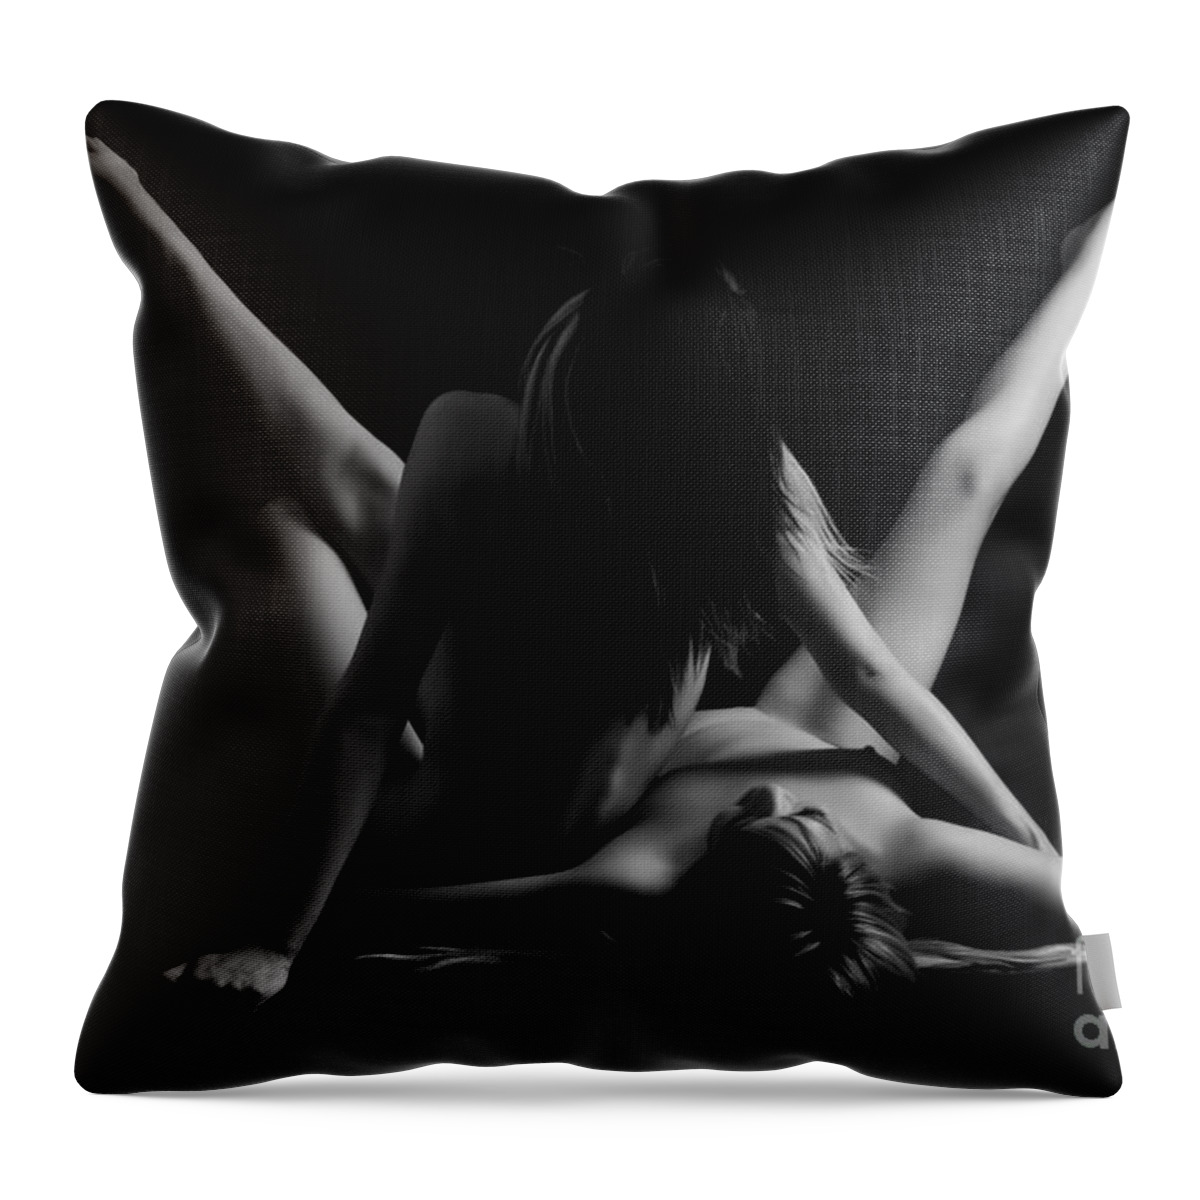 Artistic Photographs Throw Pillow featuring the photograph Breaking glimpse by Robert WK Clark